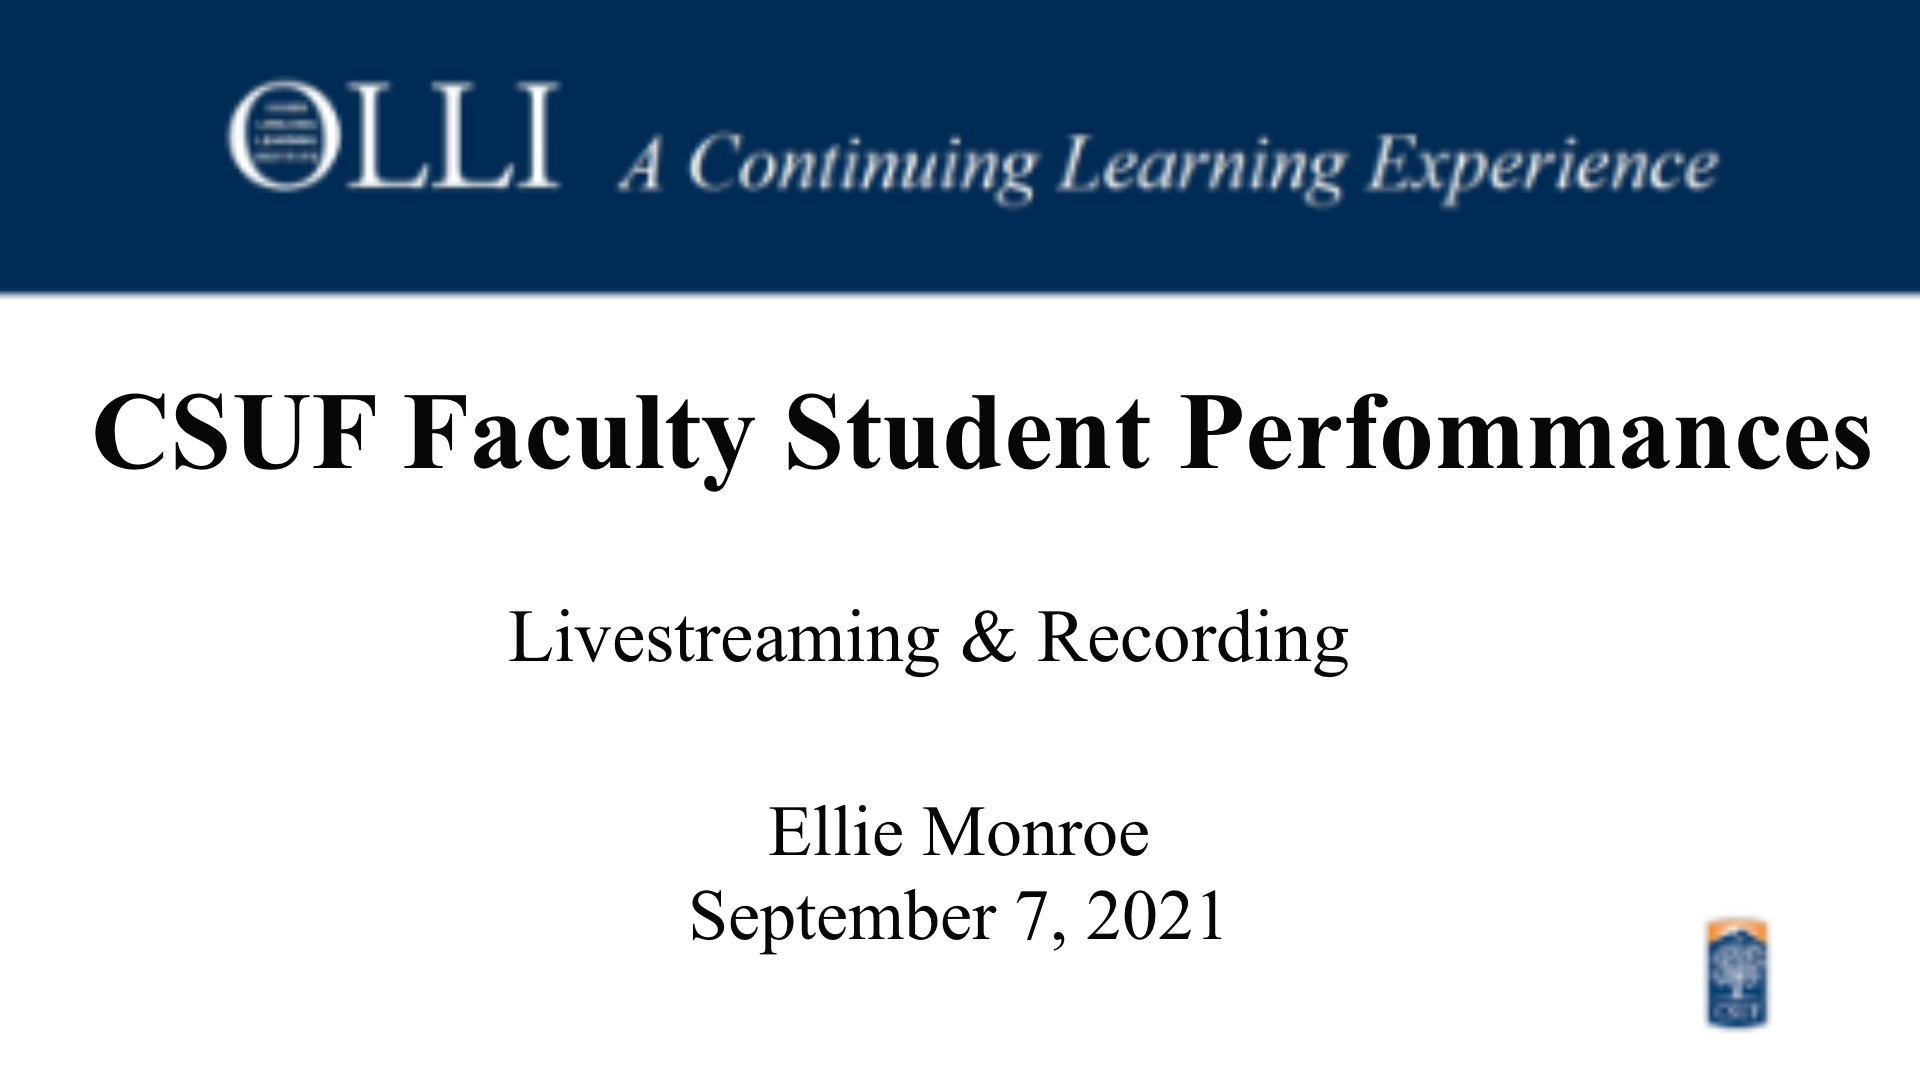 Click here to view the livestream of Faculty Student Performances